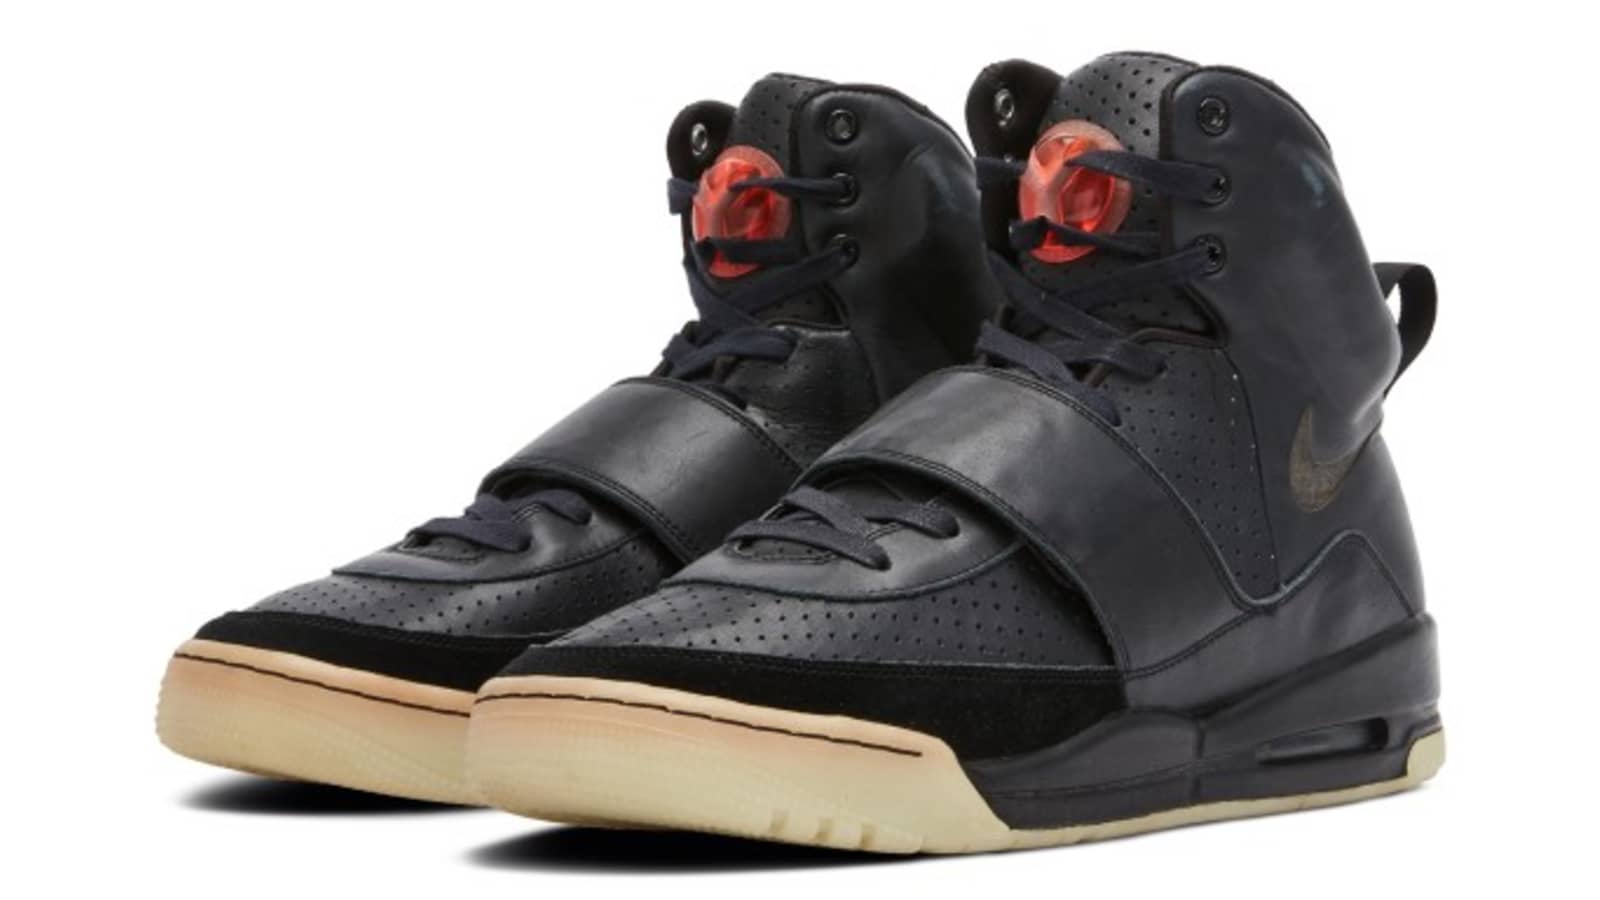 METCHA  US$ 1M for Kanye West's Nike Air Yeezy 1 prototype